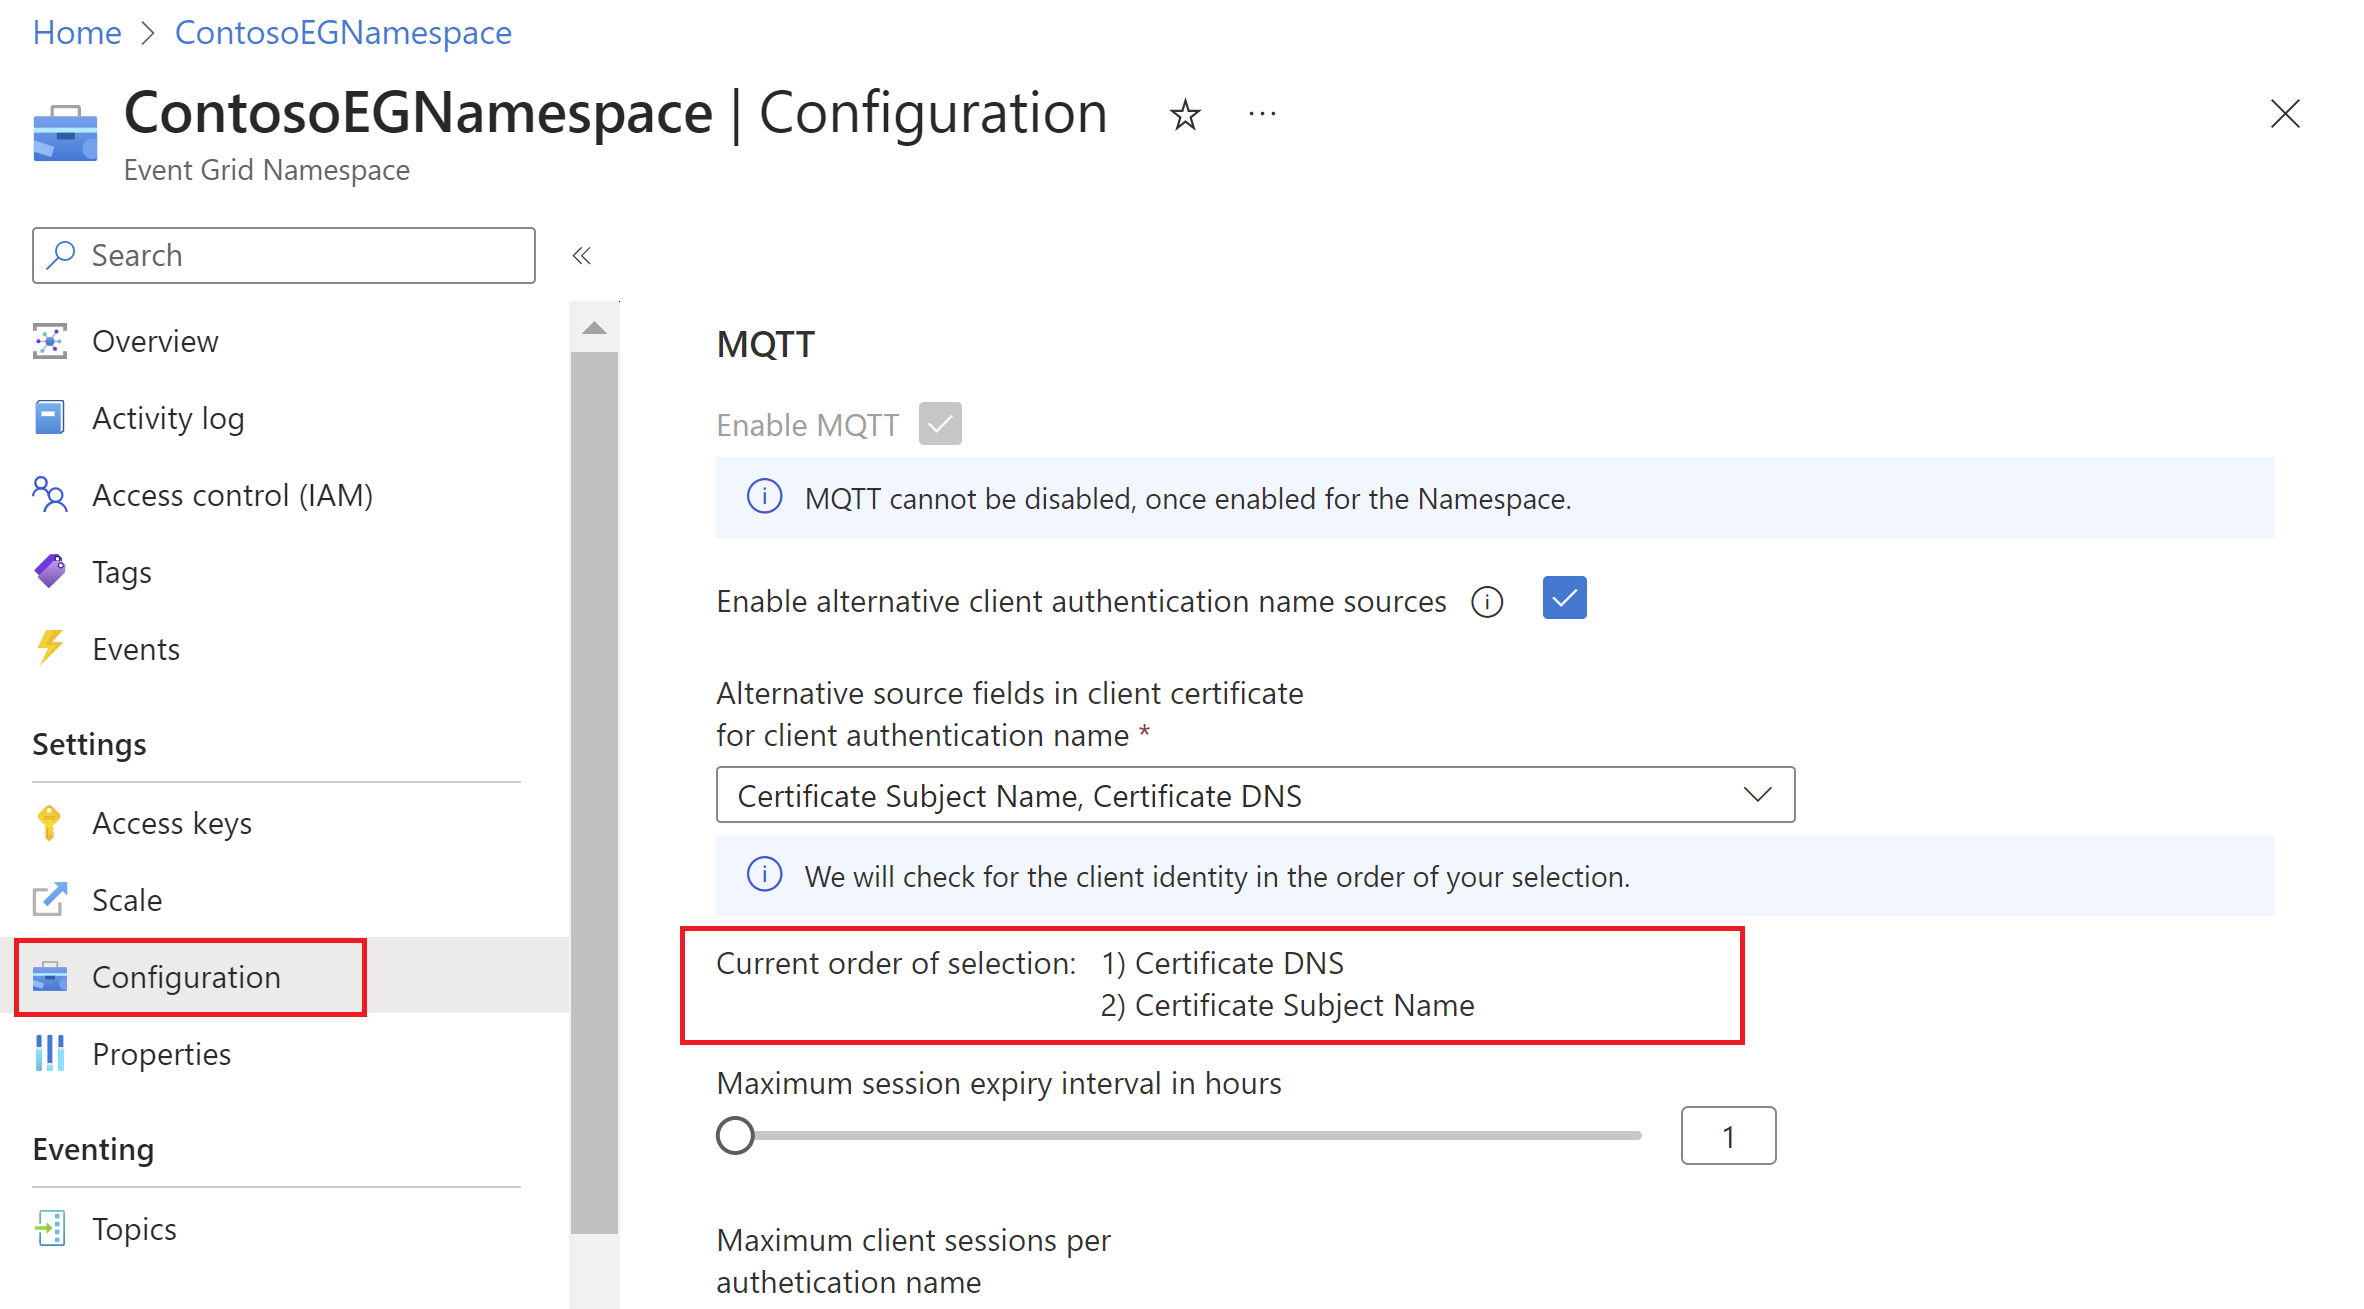 Screenshot showing namespace configuration page with client authentication name alternate source settings.